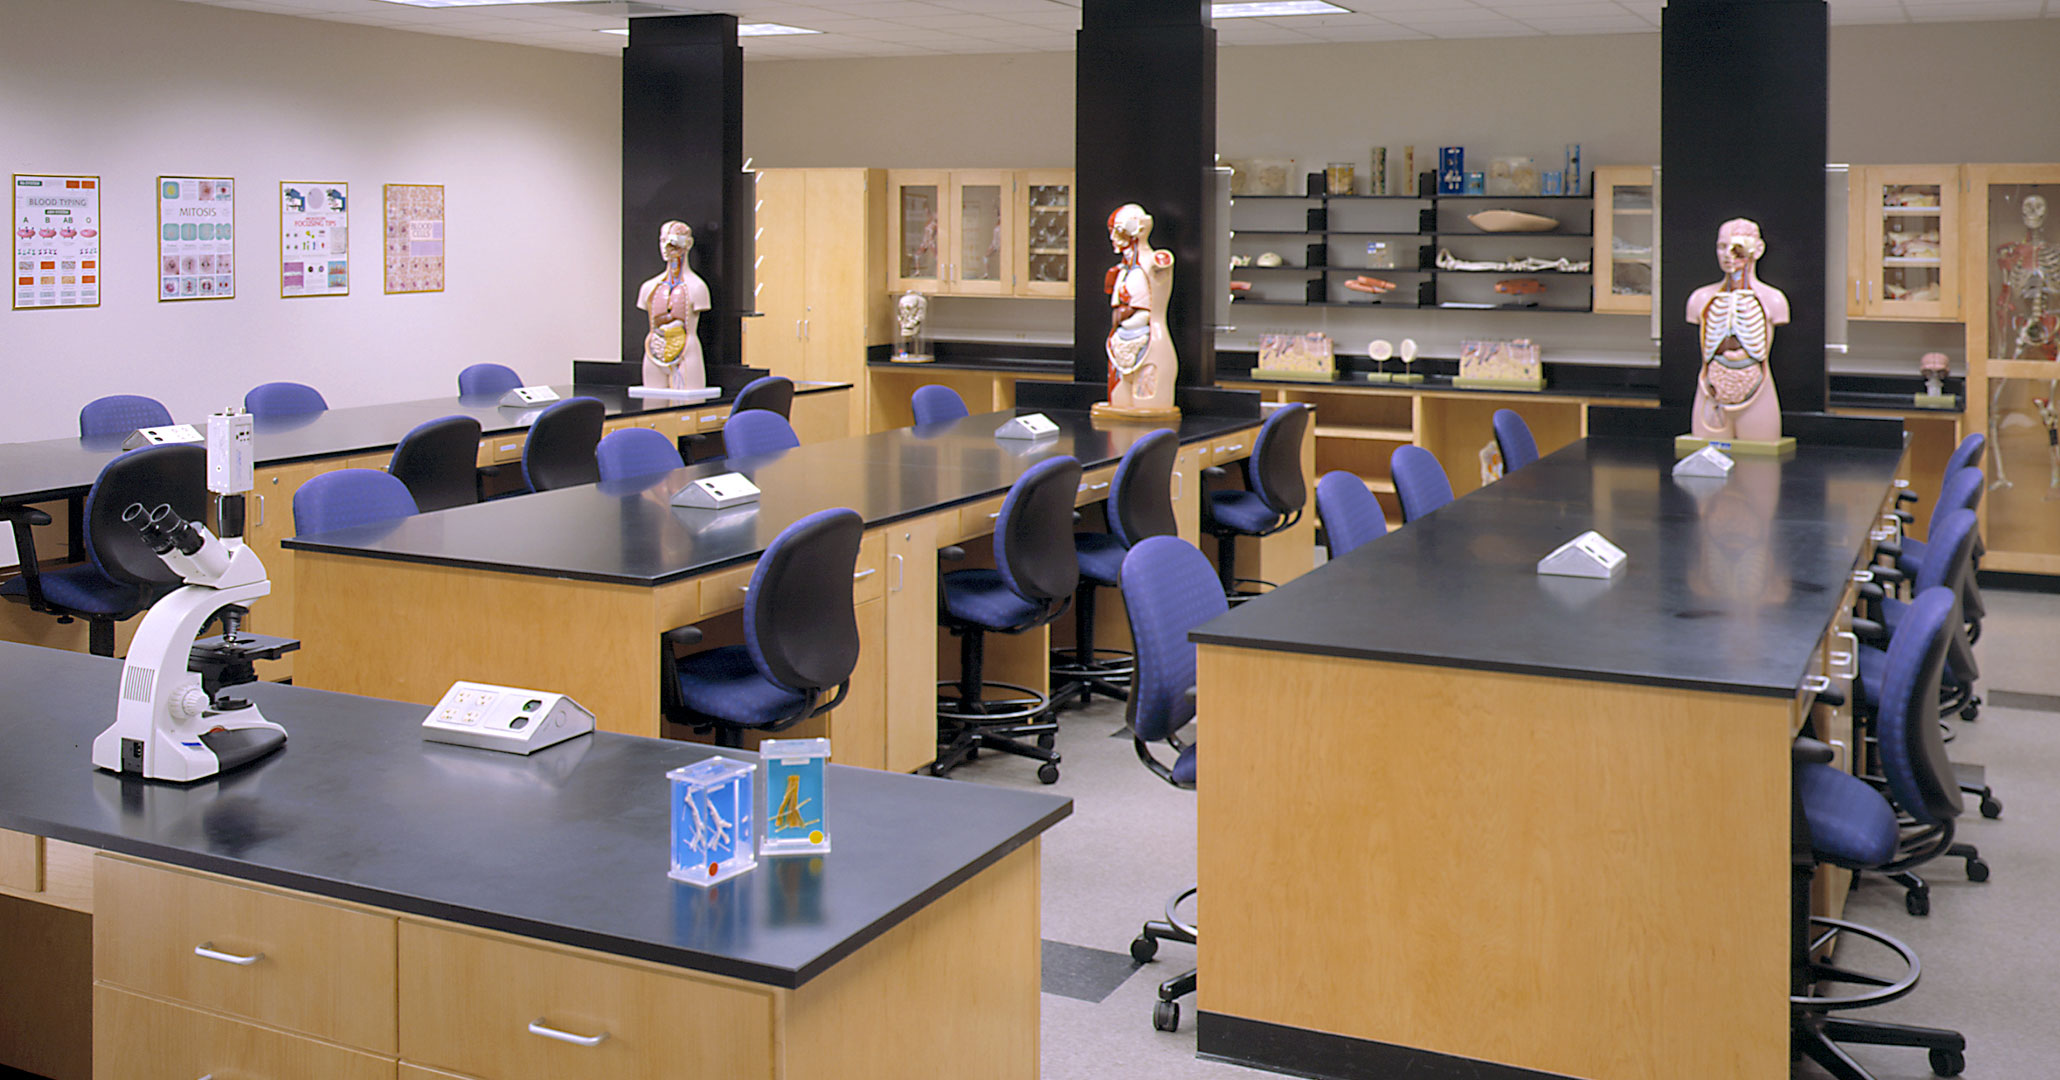 Midlands Technical College worked with Boudreaux architects to design classrooms for the new Health Science Building.